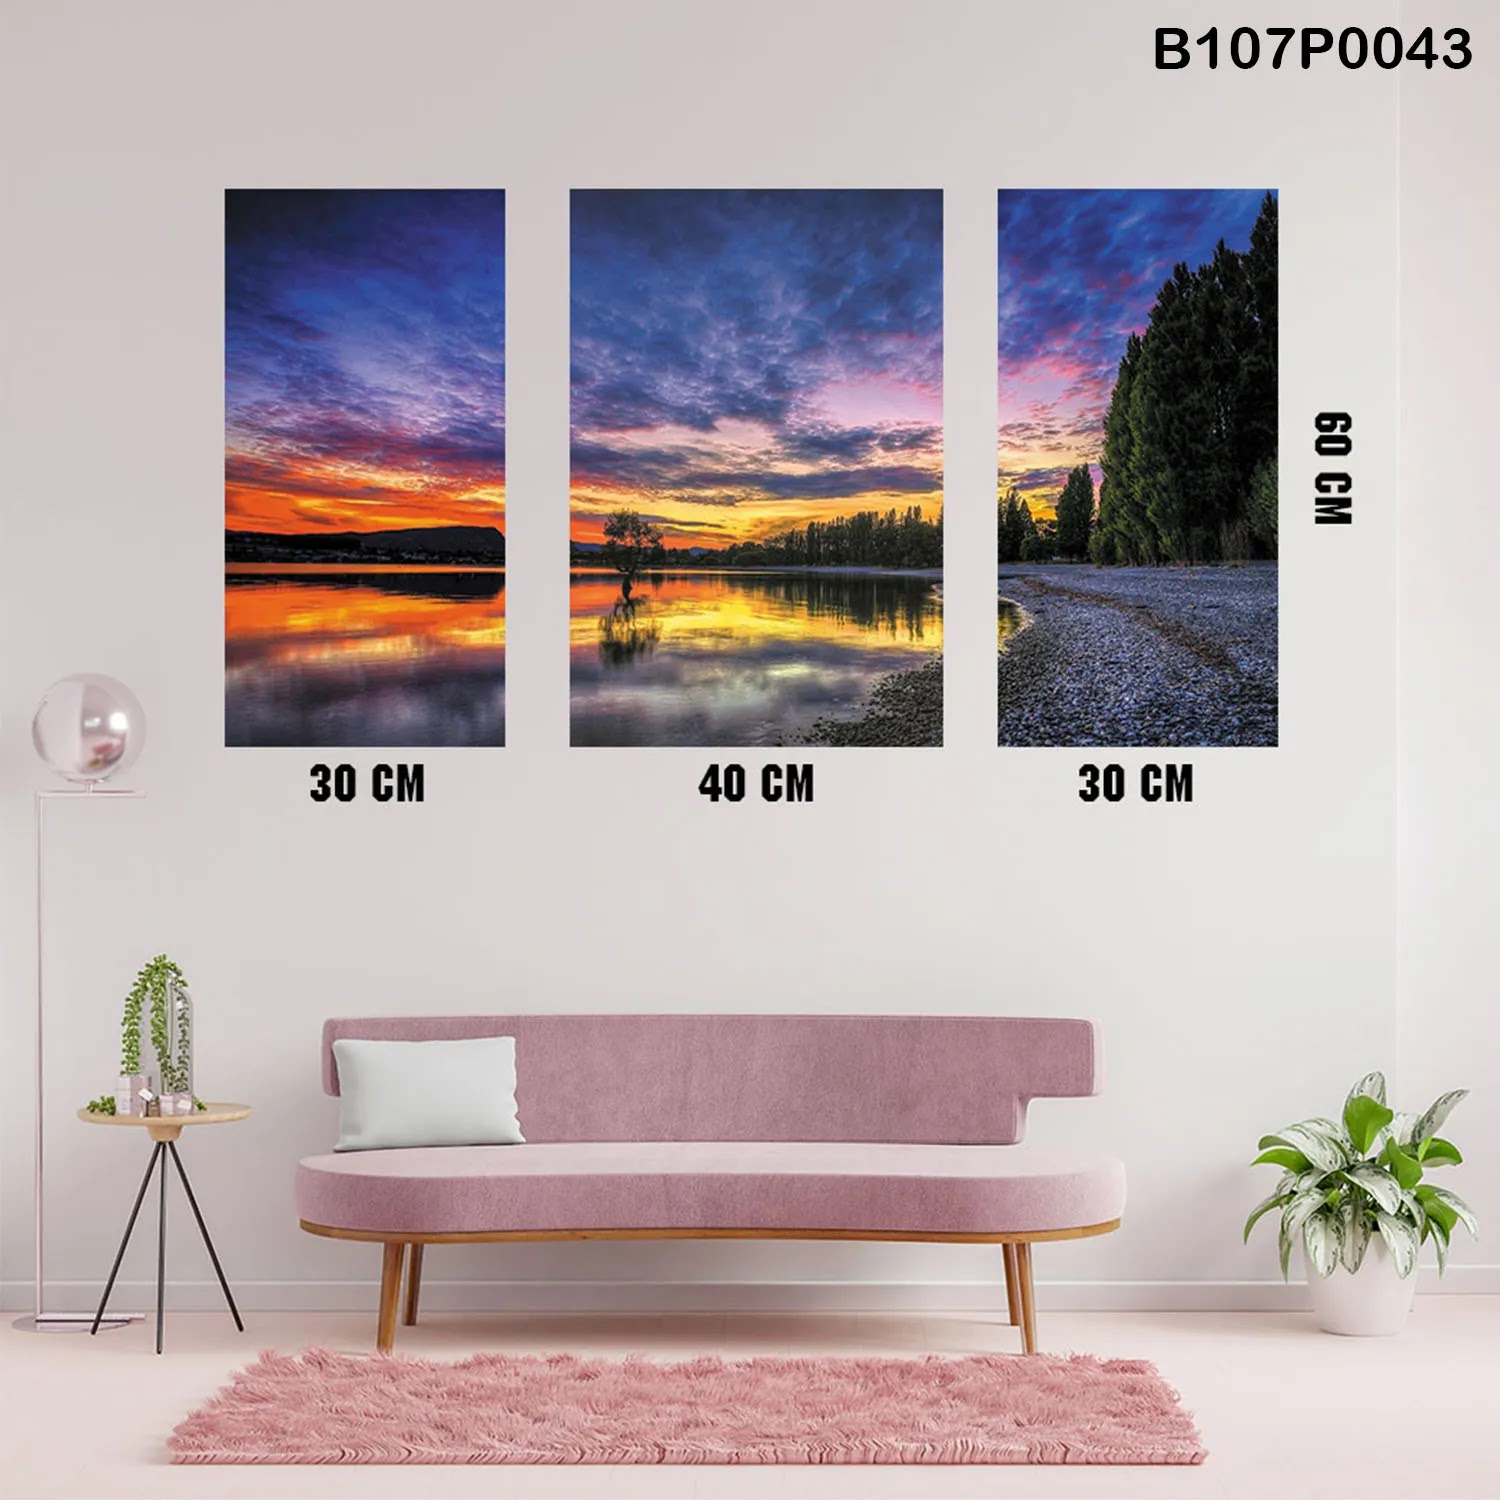 Triptych panel with lake shore at sunset view